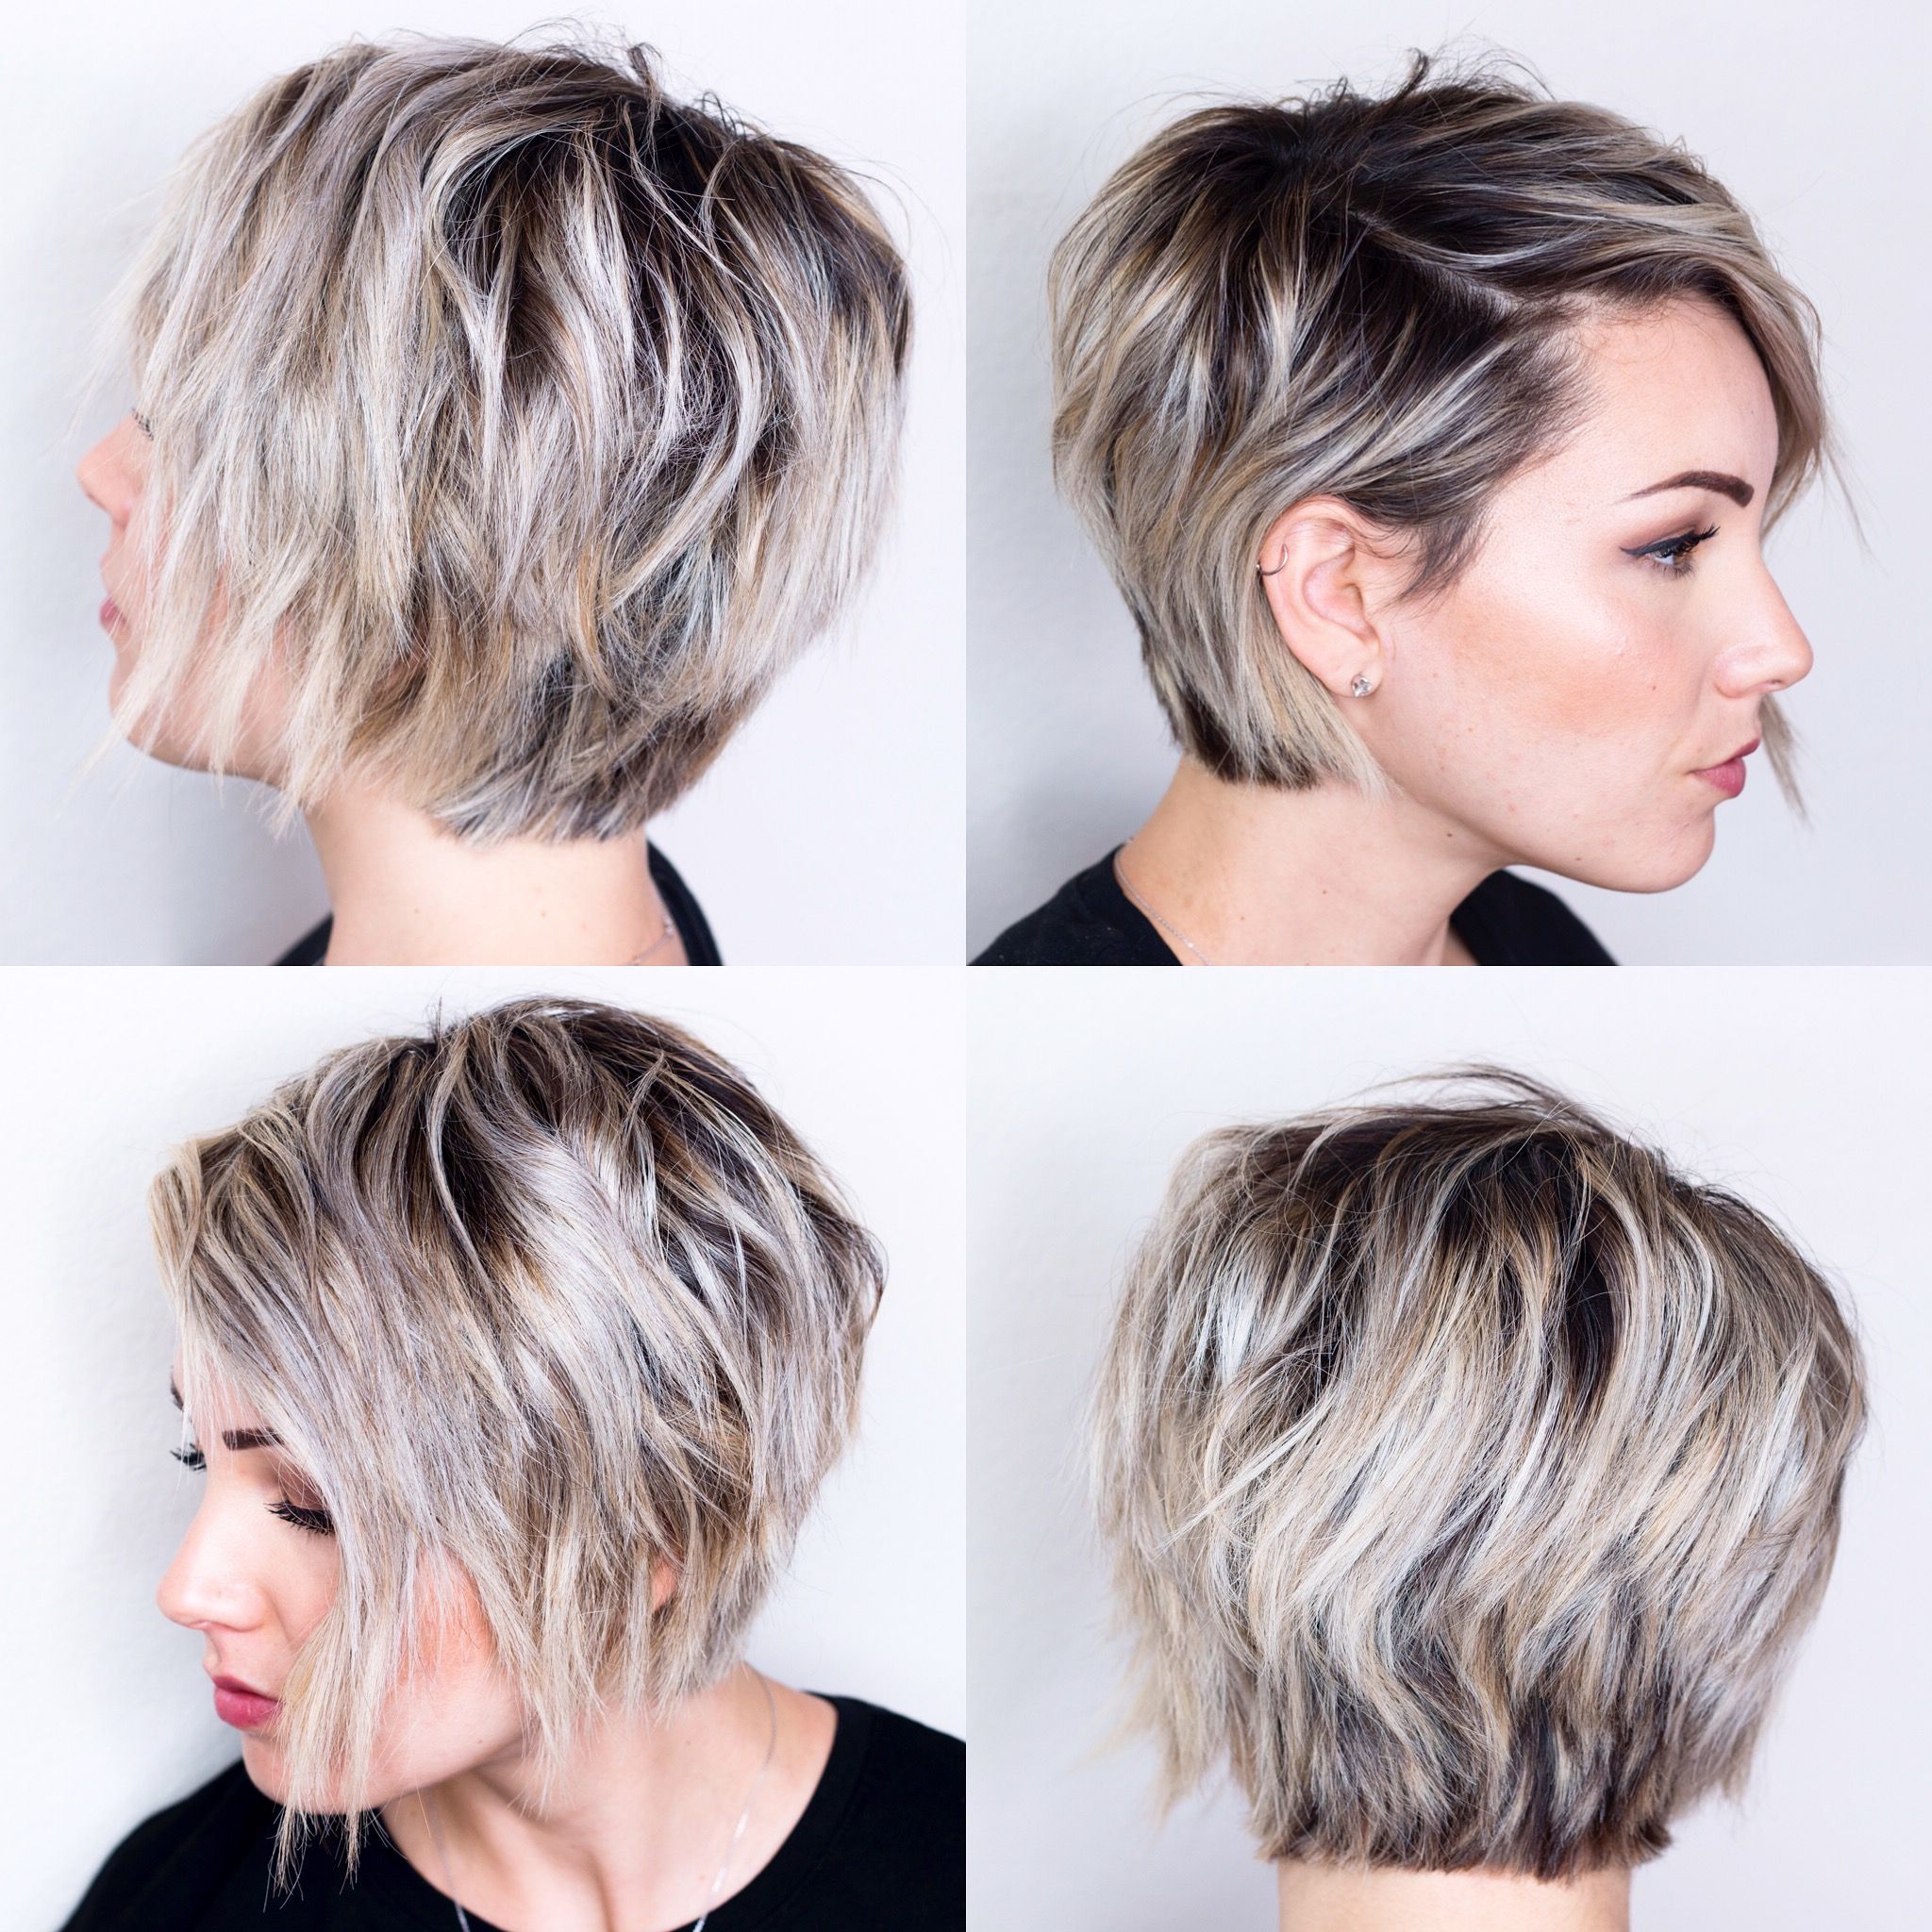 360 View Of Short Hair | H A I R In 2018 | Pinterest | Short Hair In Short Cuts For Oval Faces (Photo 3 of 25)